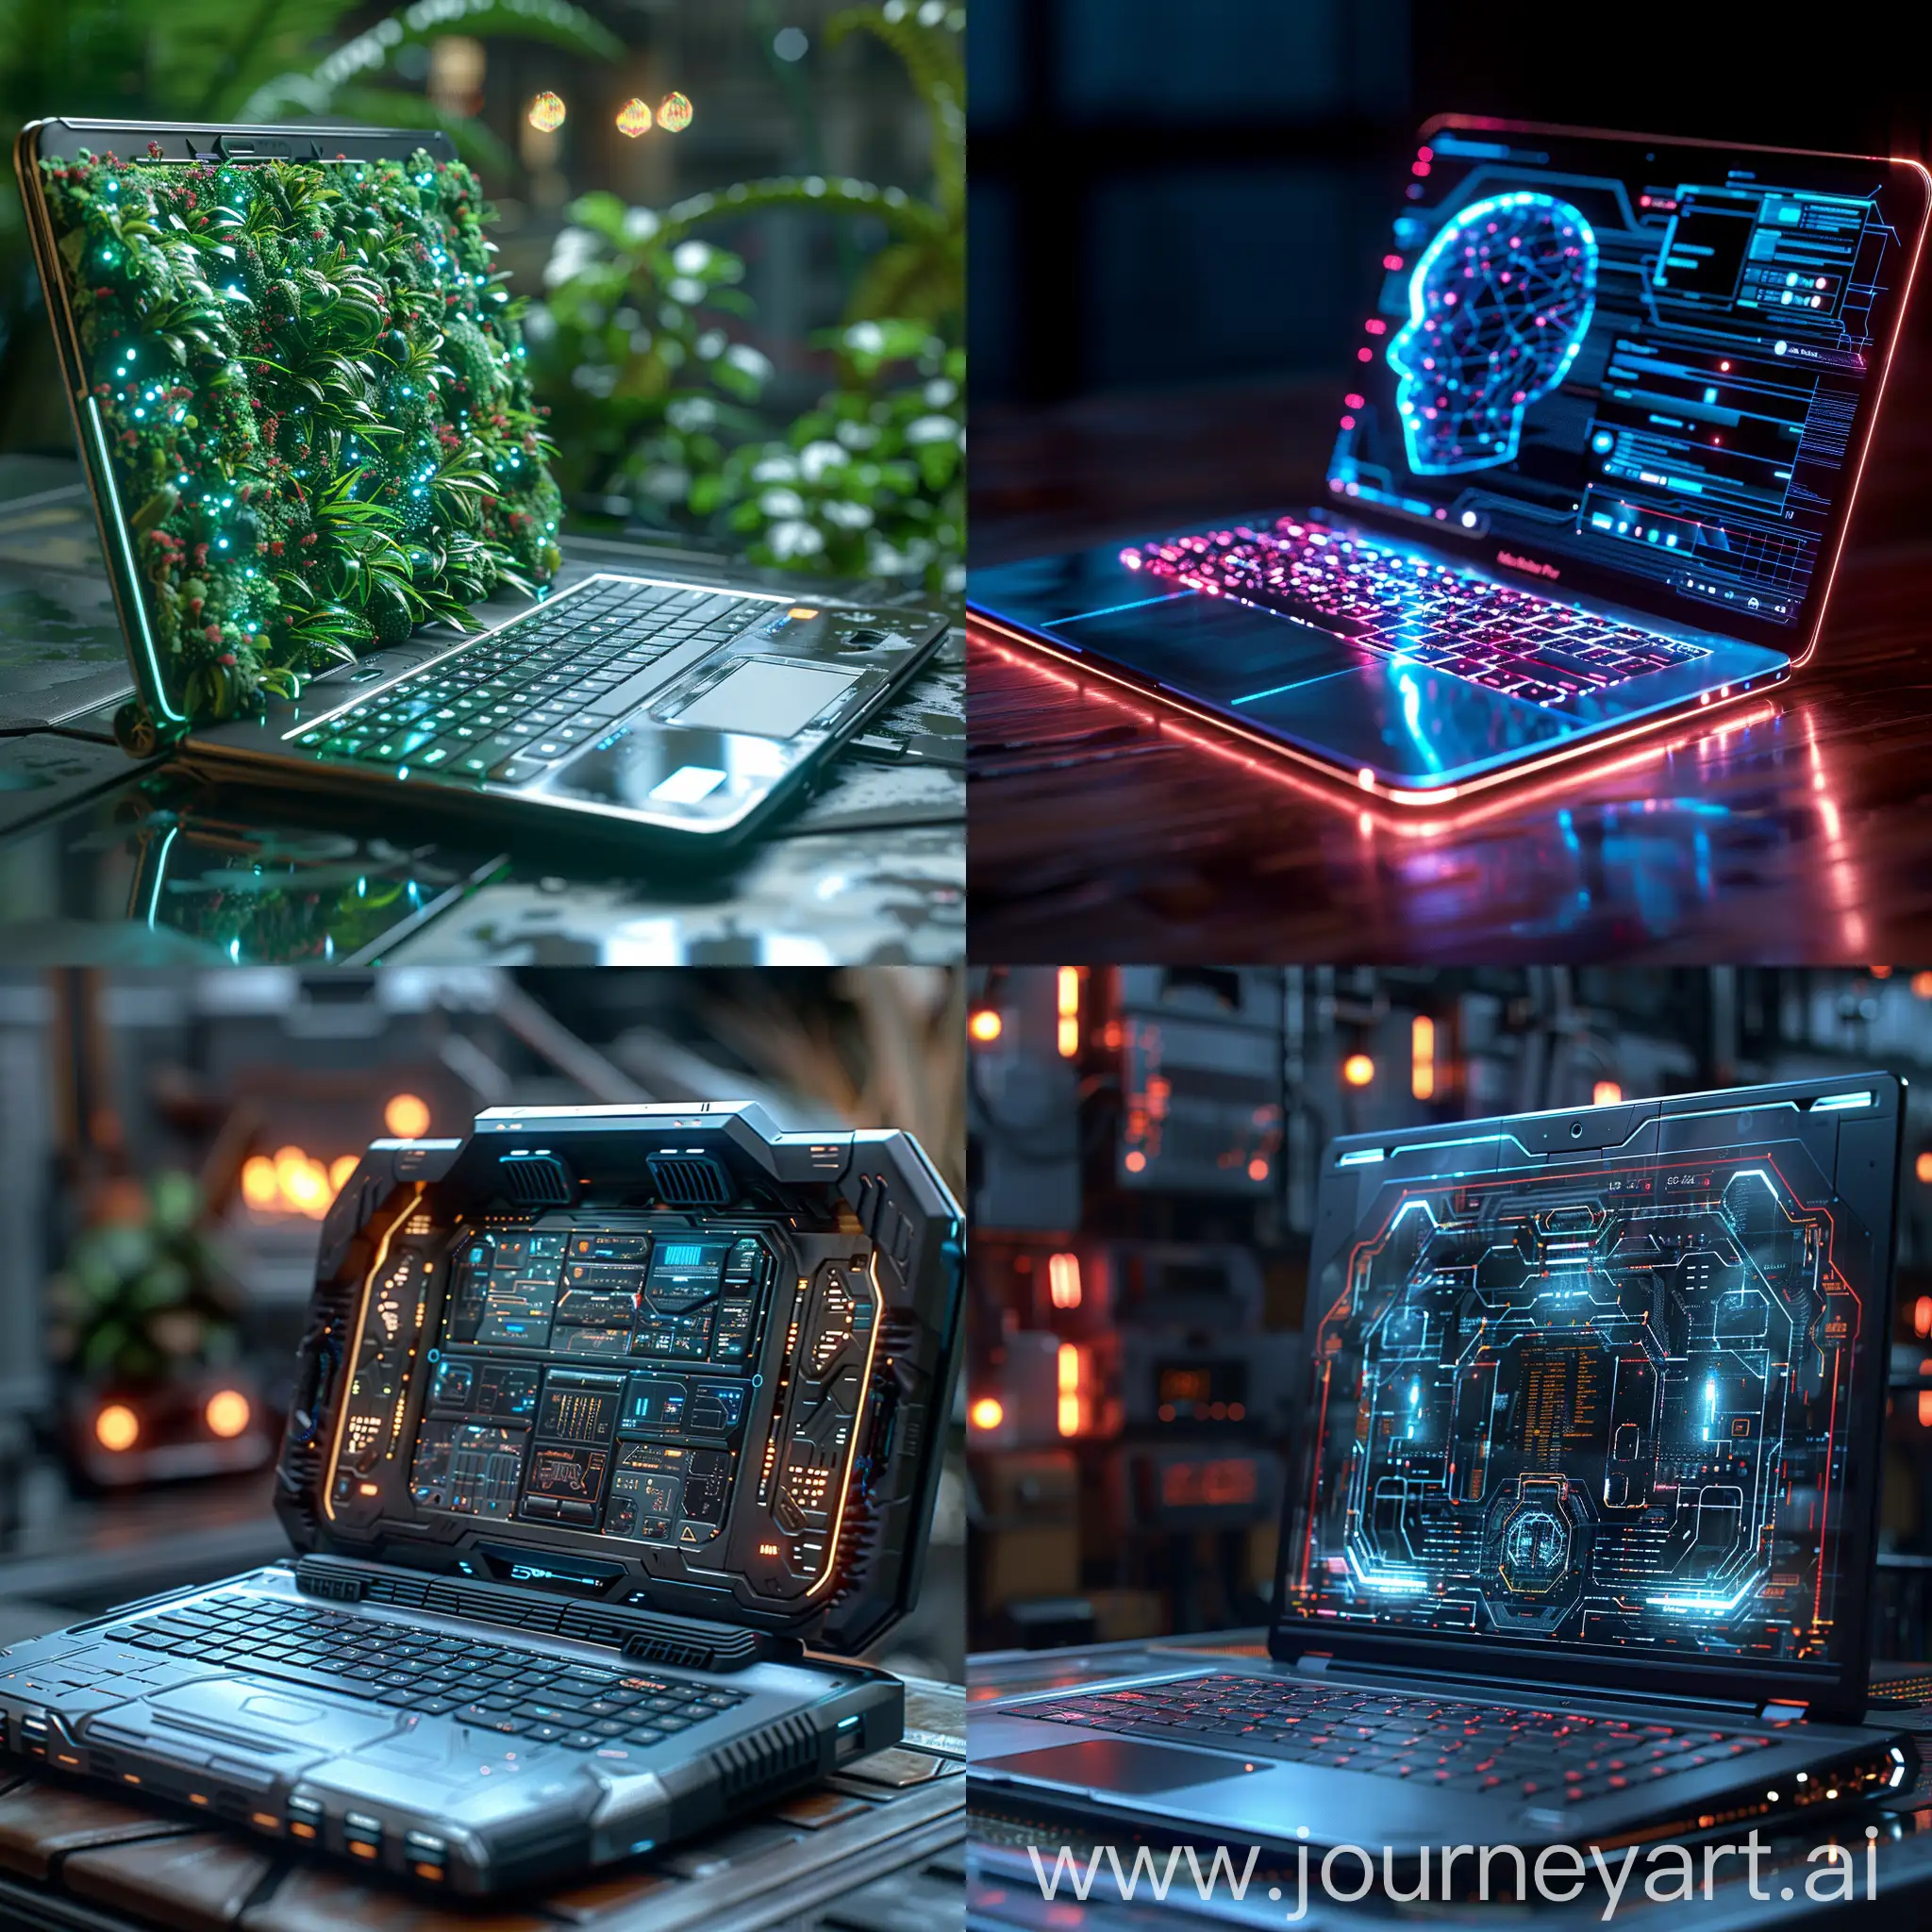 Futuristic-Laptop-with-Biodegradable-Materials-and-EnergyEfficient-Processor